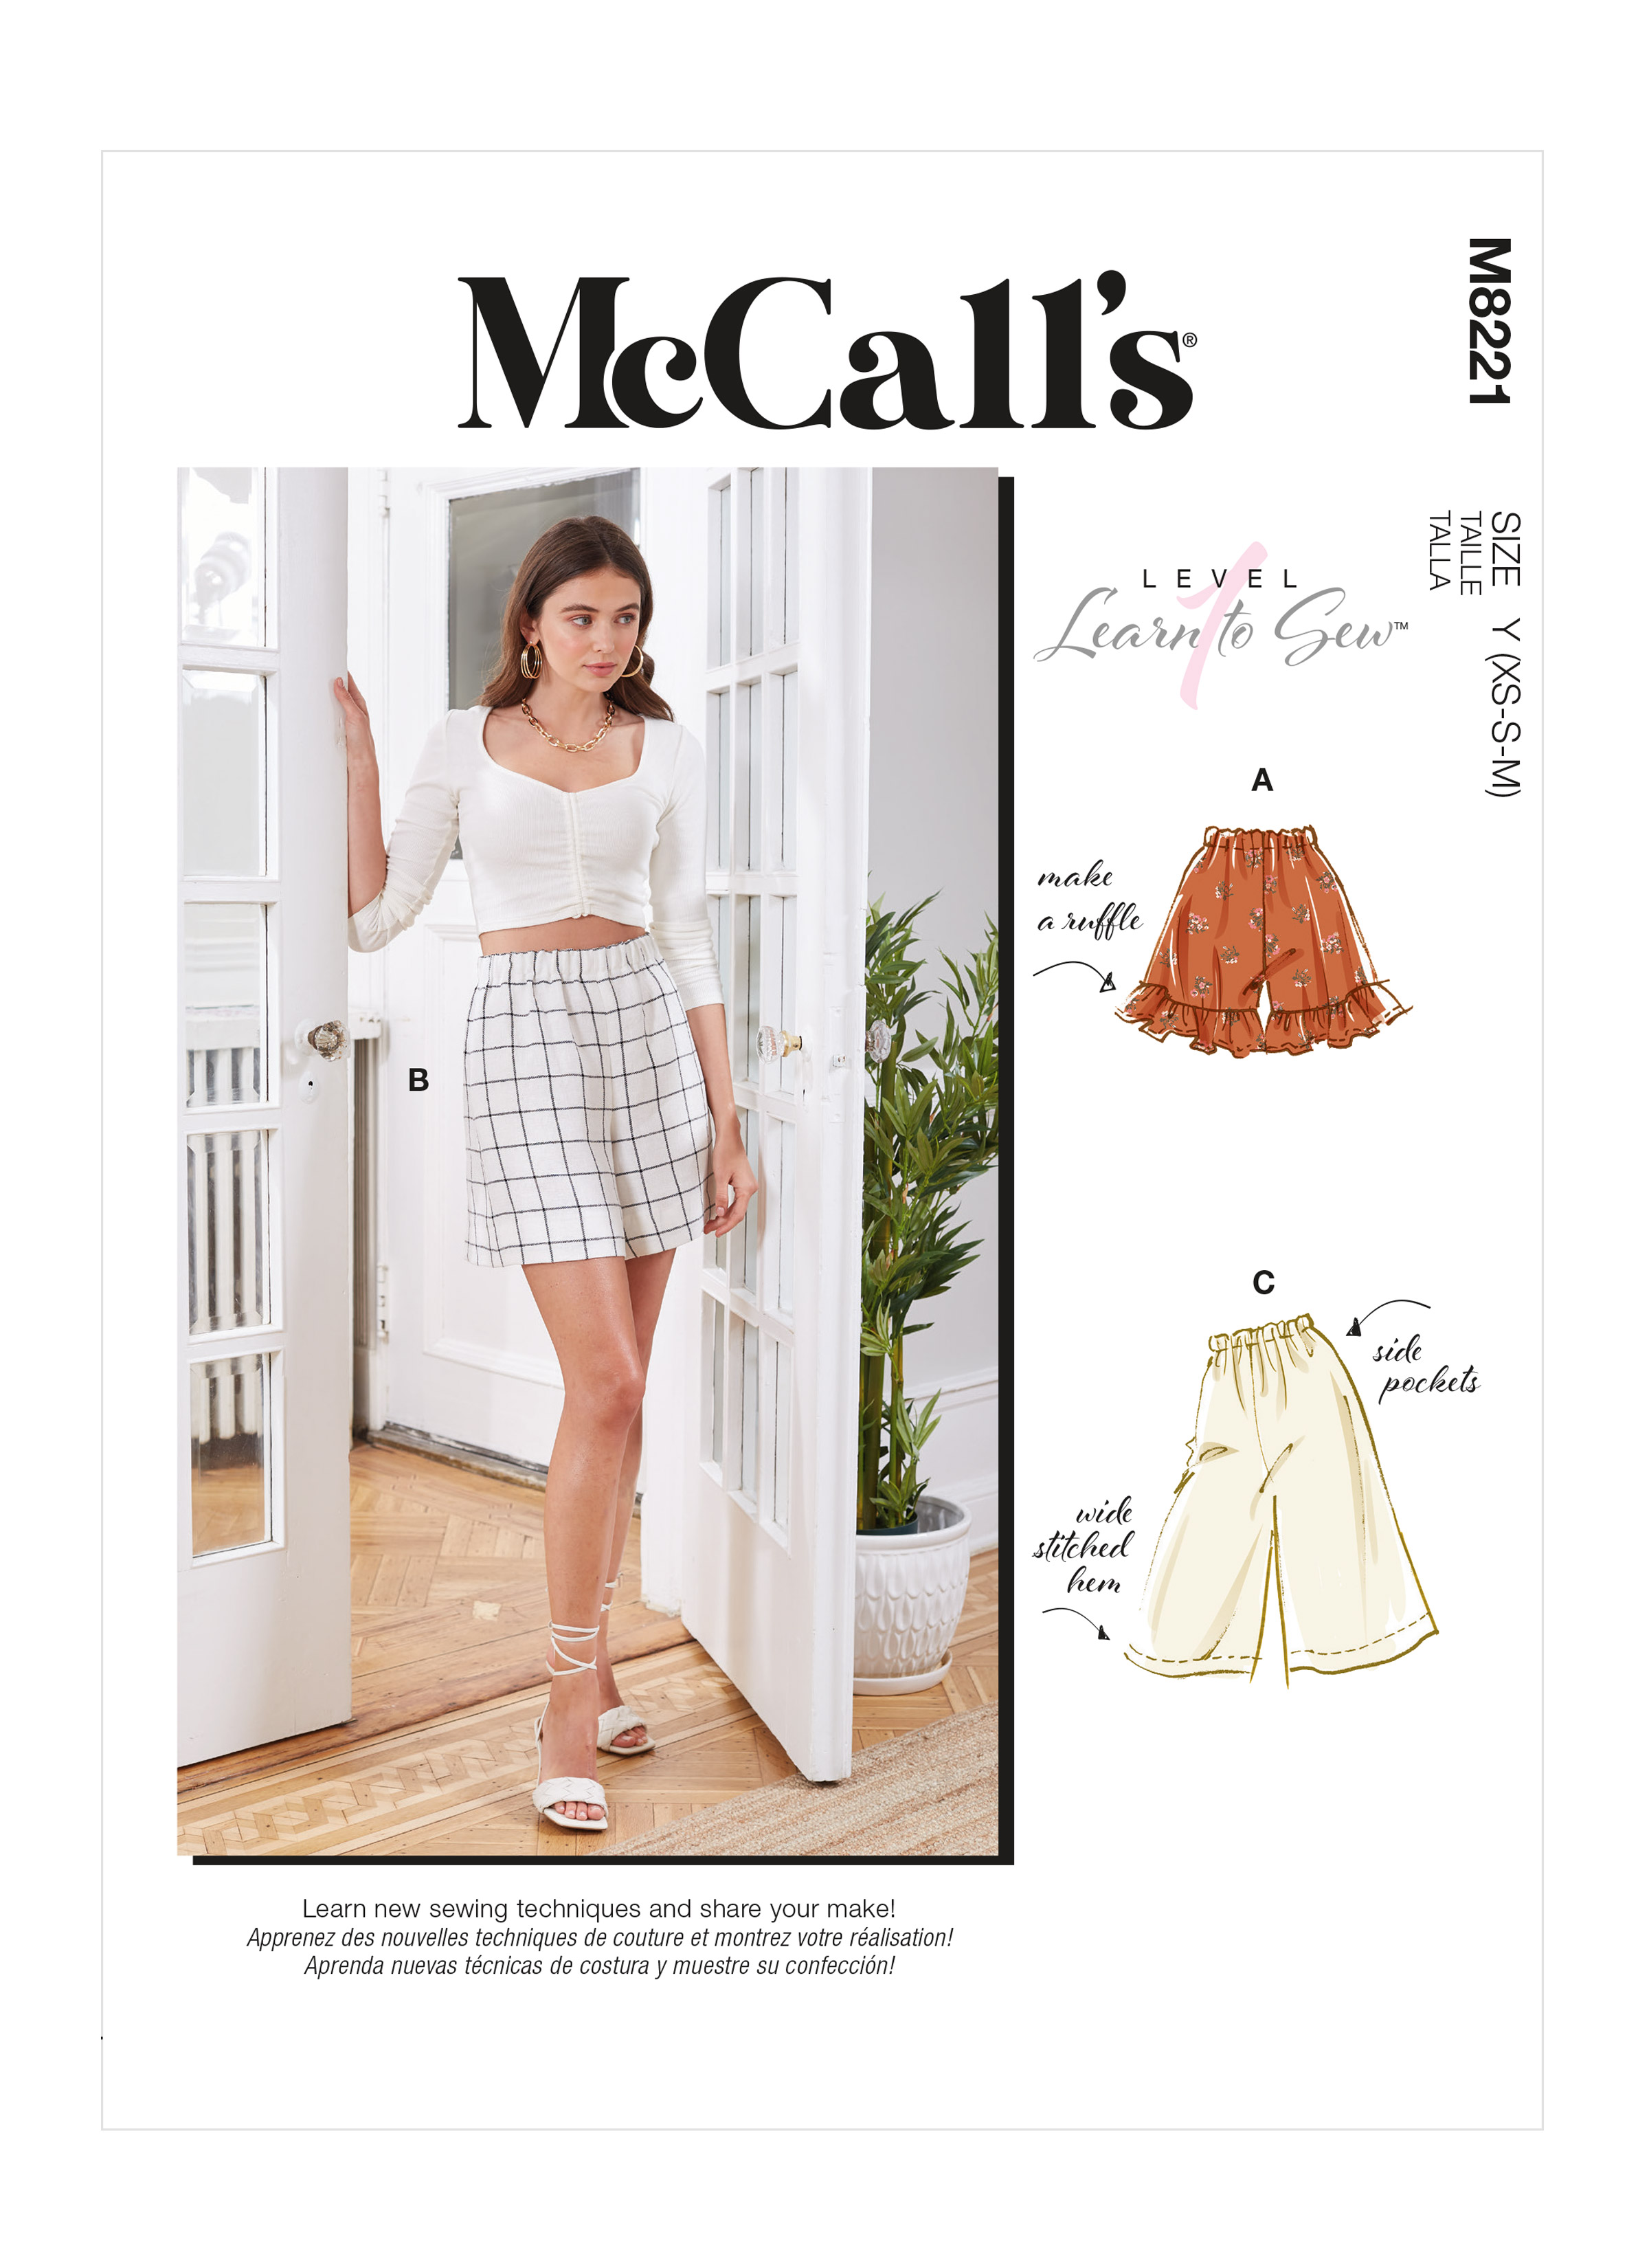 https://images.patternreview.com/sewing/patterns/mccall/2021/8221/8221.jpg